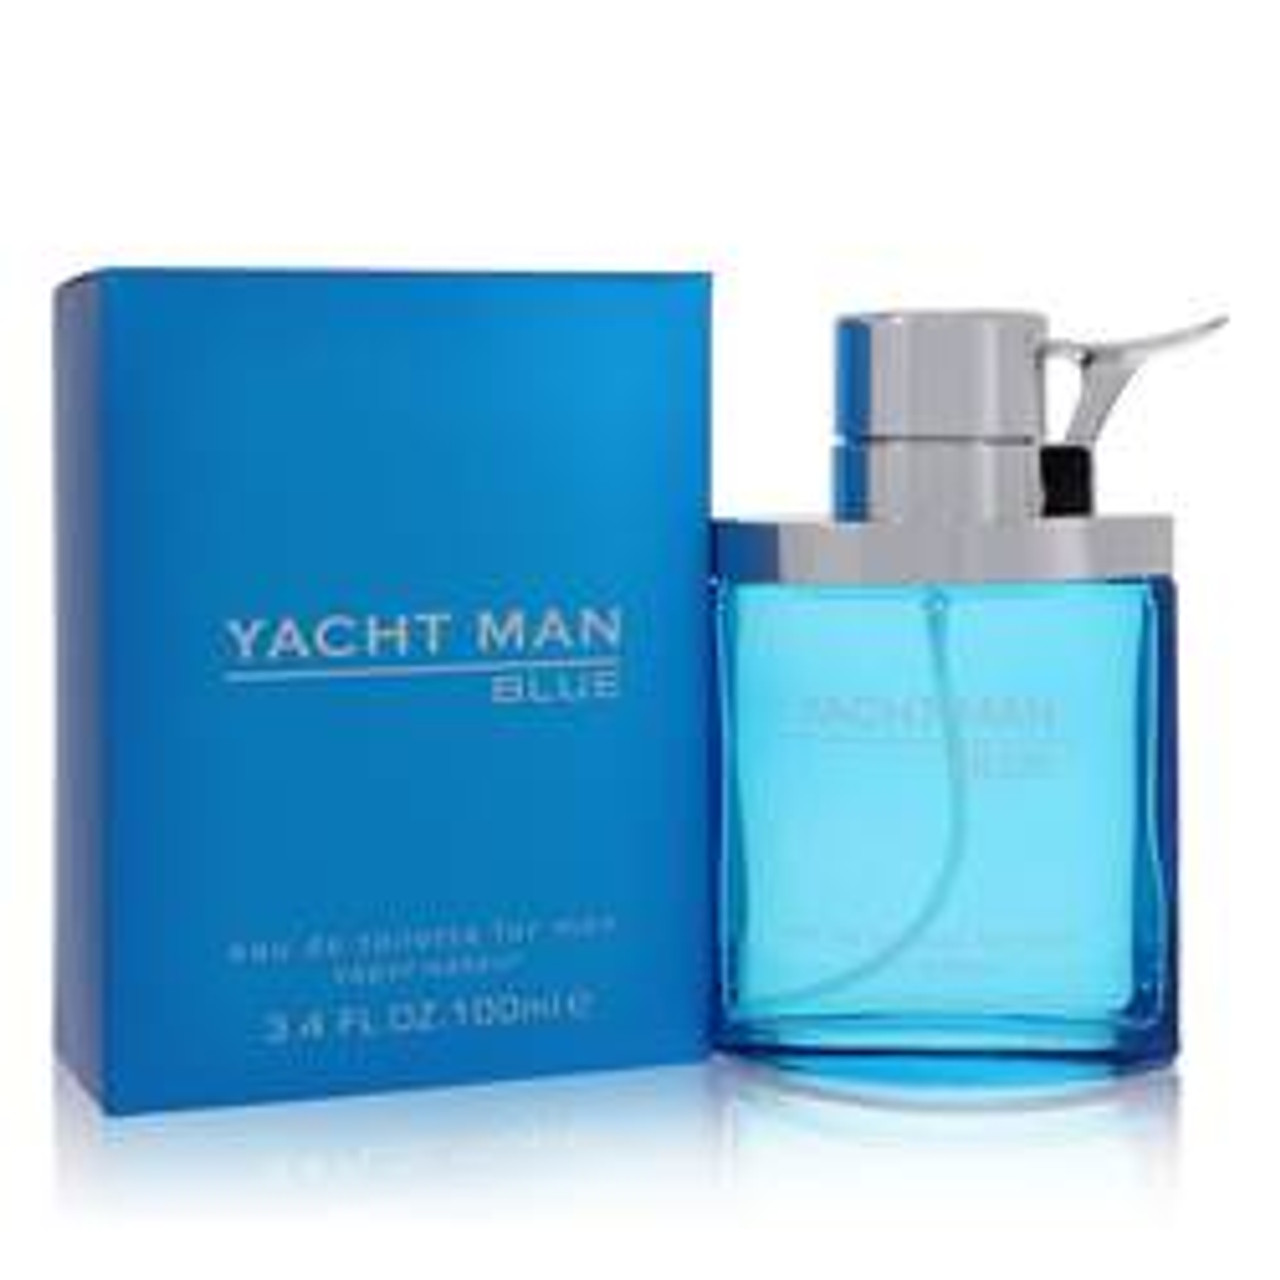 Yacht Man Blue Cologne By Myrurgia Eau De Toilette Spray 3.4 oz for Men - [From 19.00 - Choose pk Qty ] - *Ships from Miami